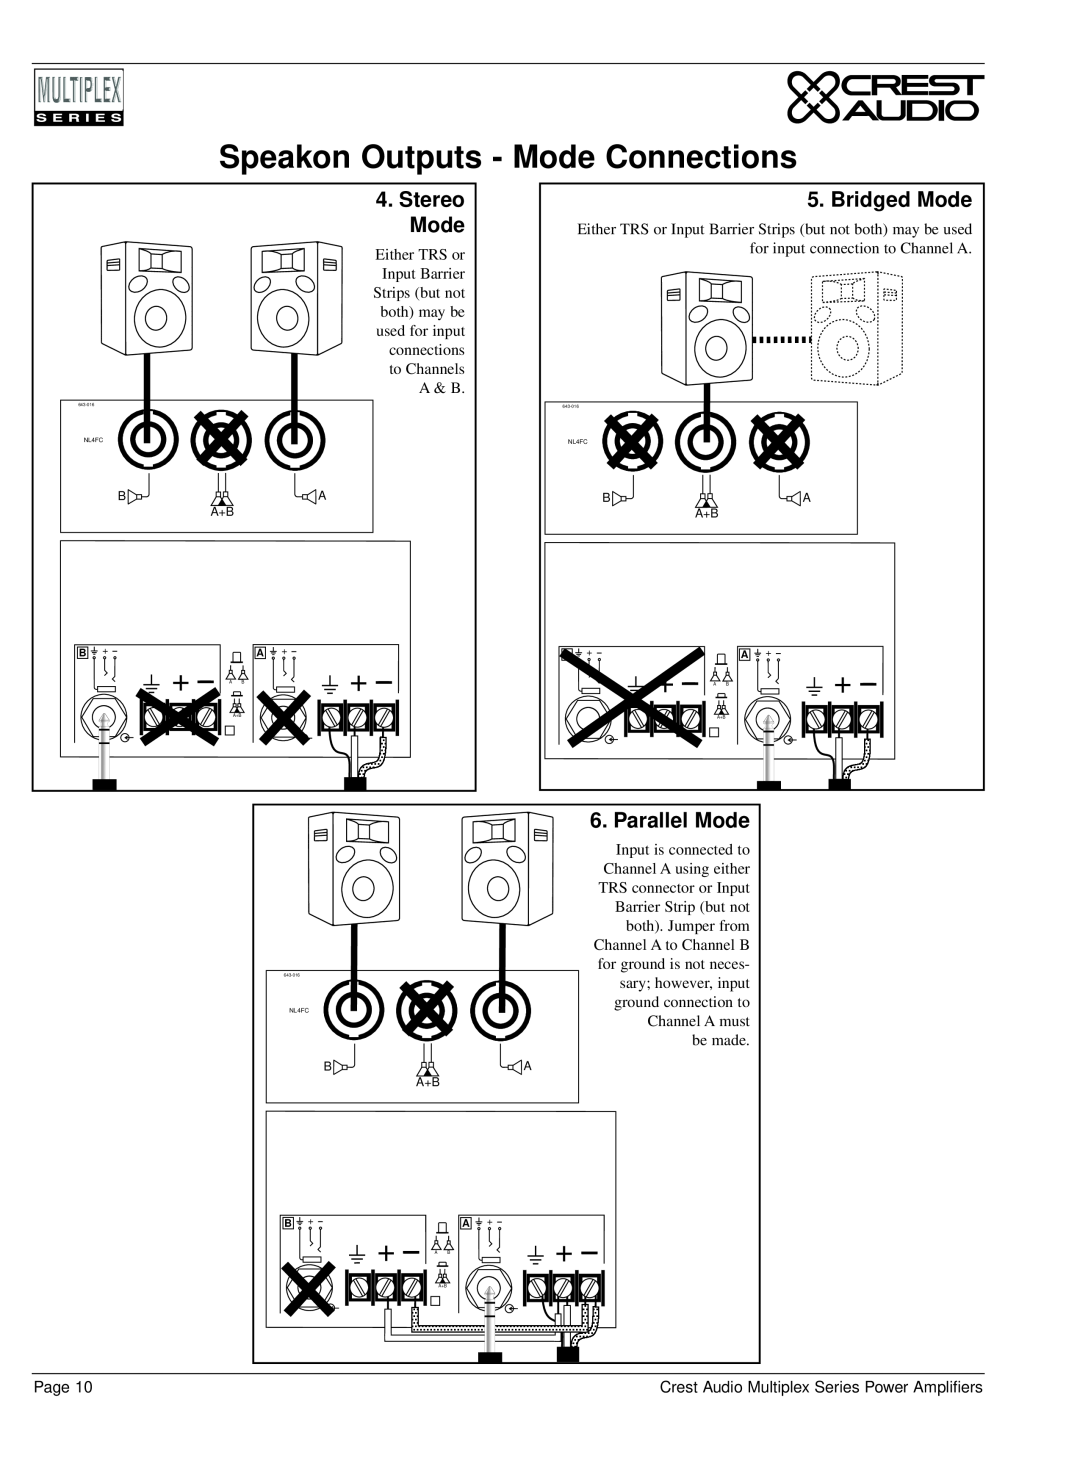 Peavey Multiplex Series owner manual Speakon Outputs - Mode Connections, Stereo Mode, Bridged Mode, Parallel Mode 